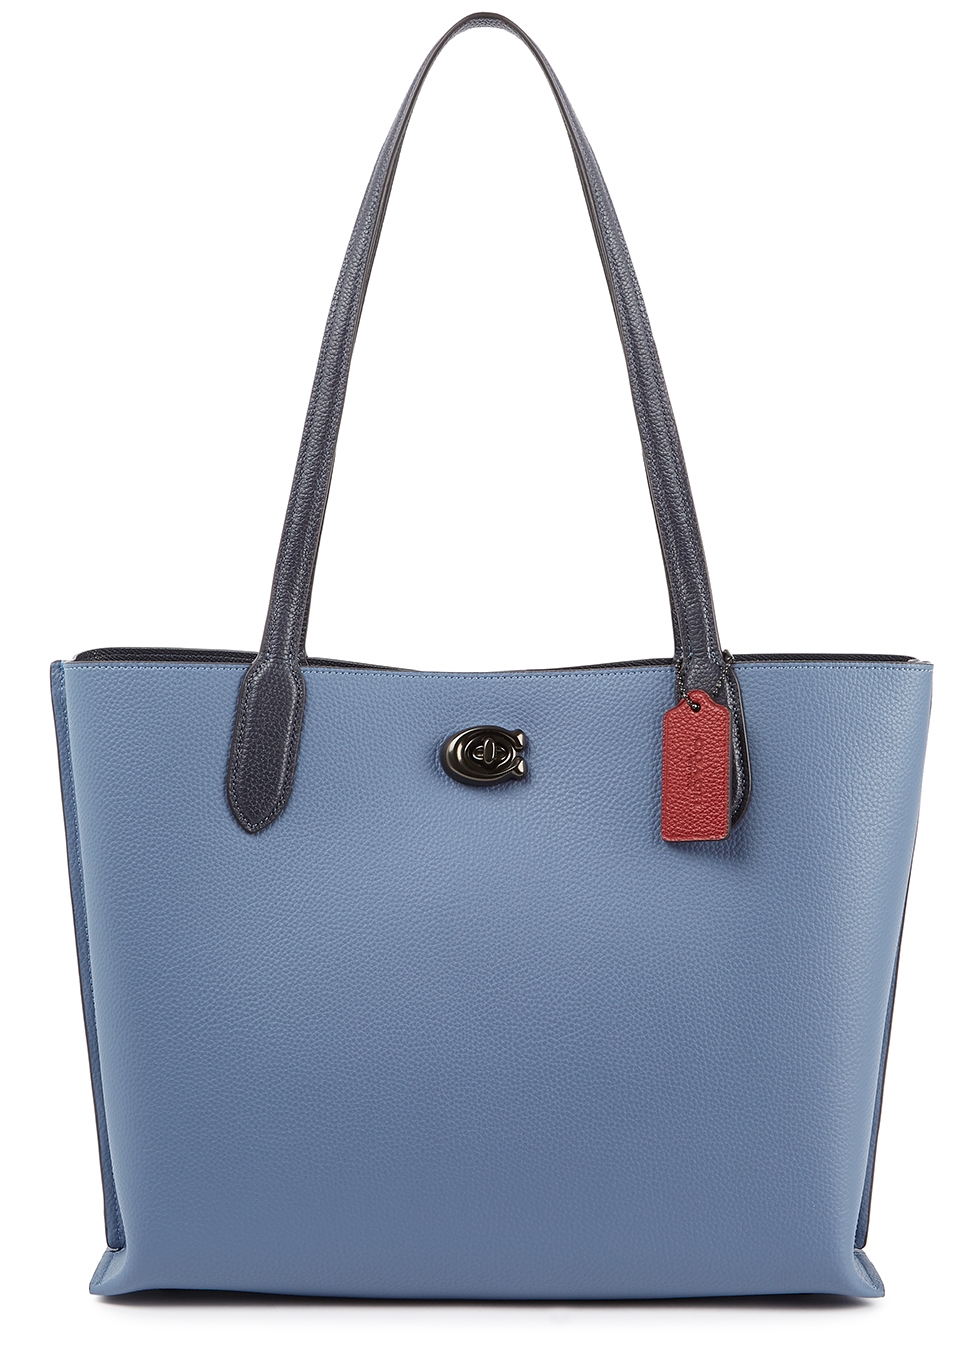 Willow blue leather tote